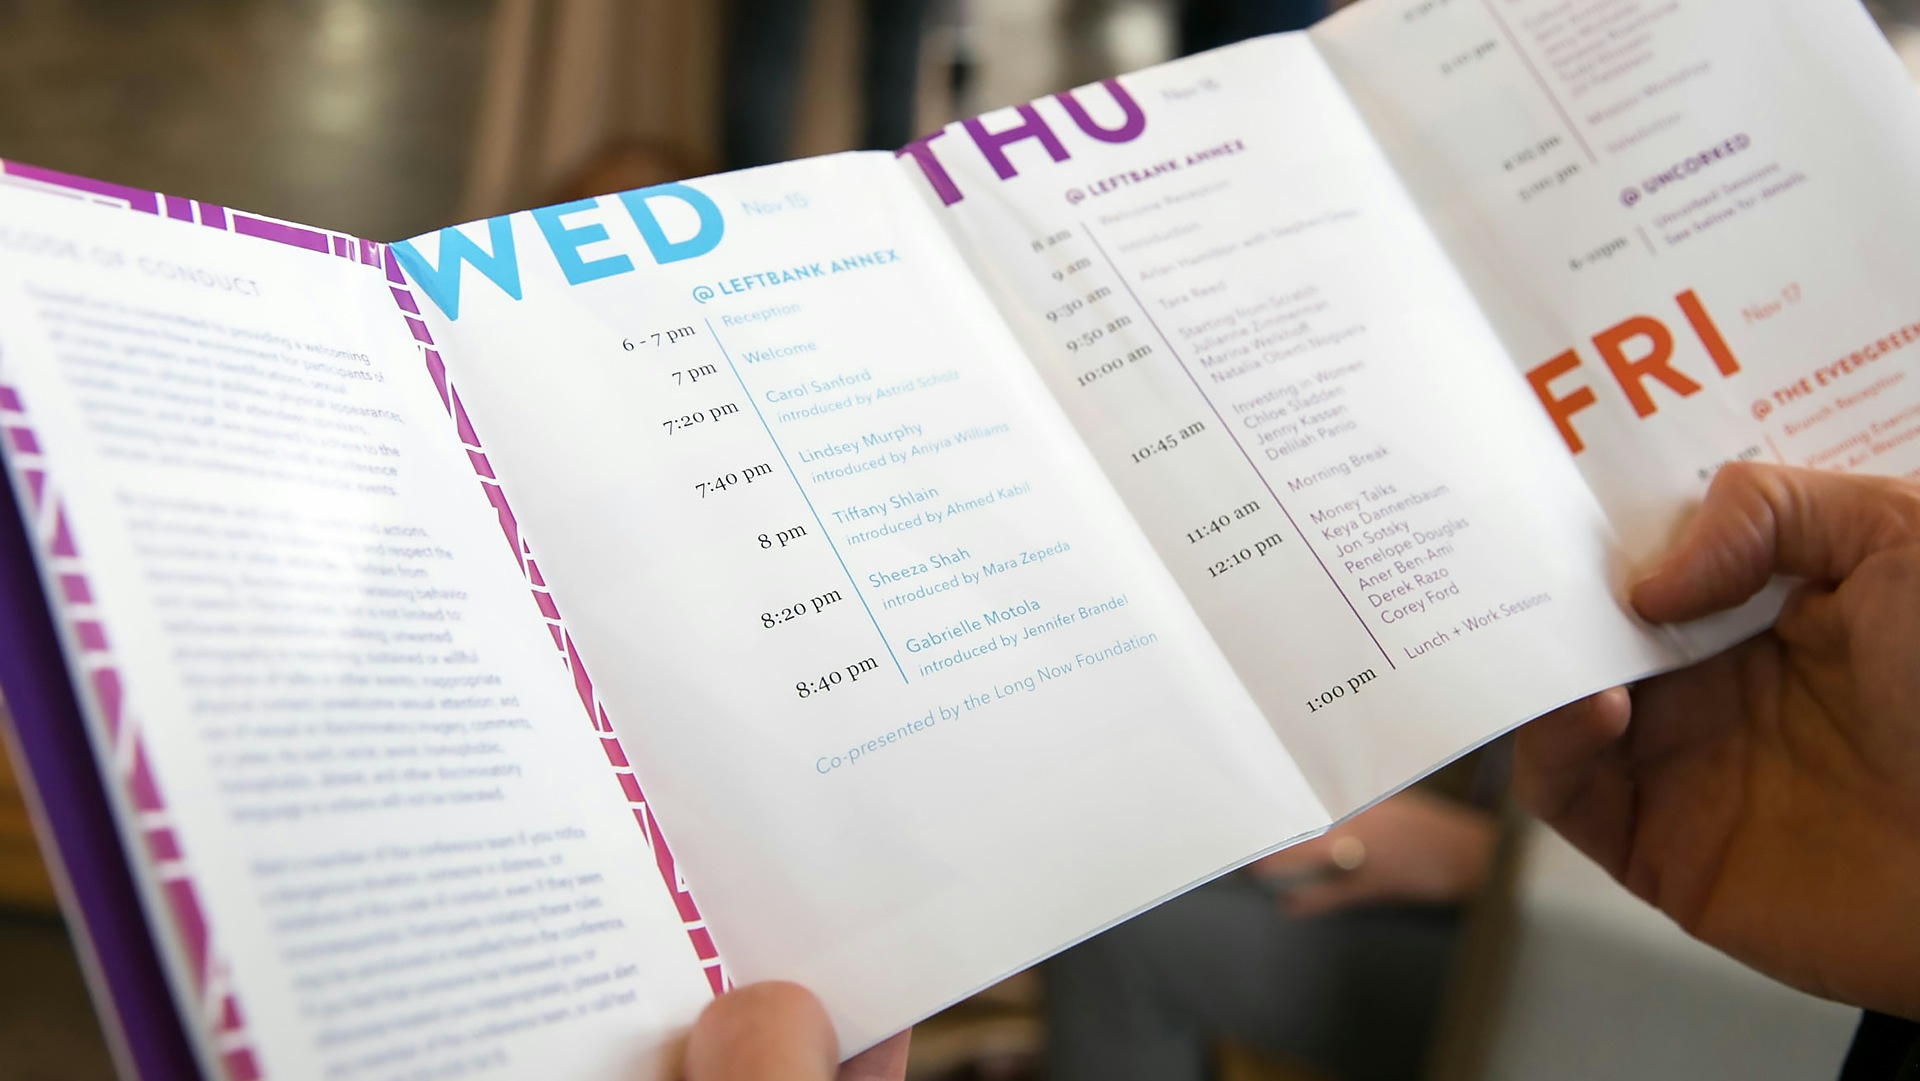 Booklet of conference schedule.